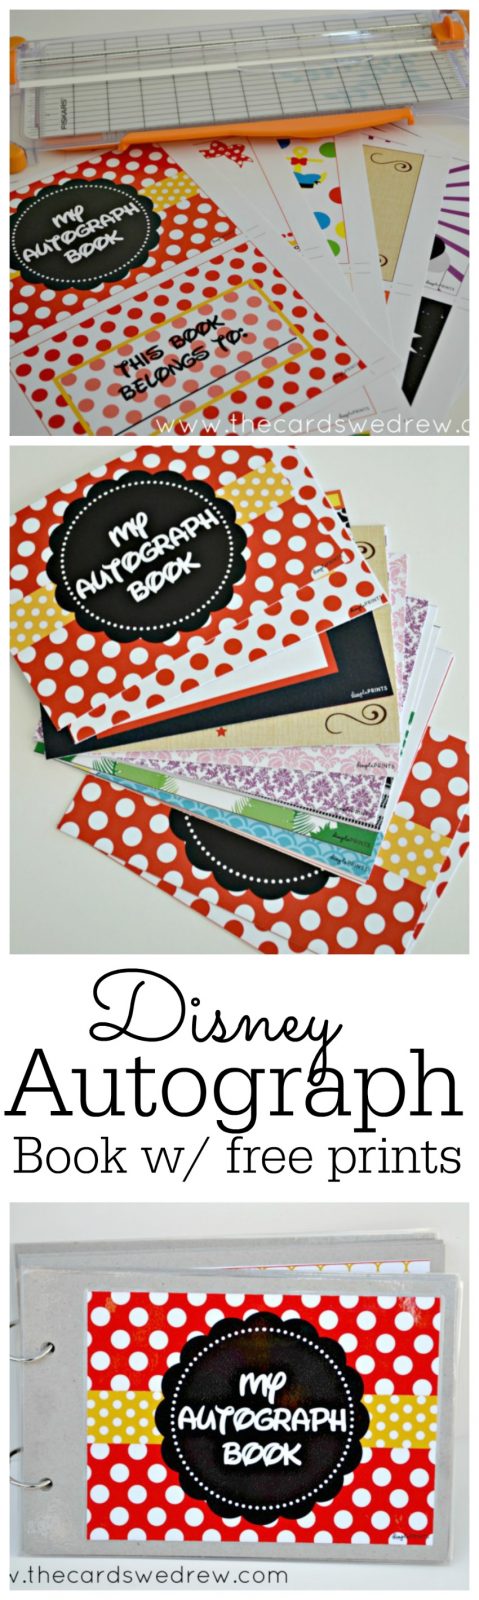 diy-disney-autograph-book-free-printable-page-2-of-2-the-cards-we